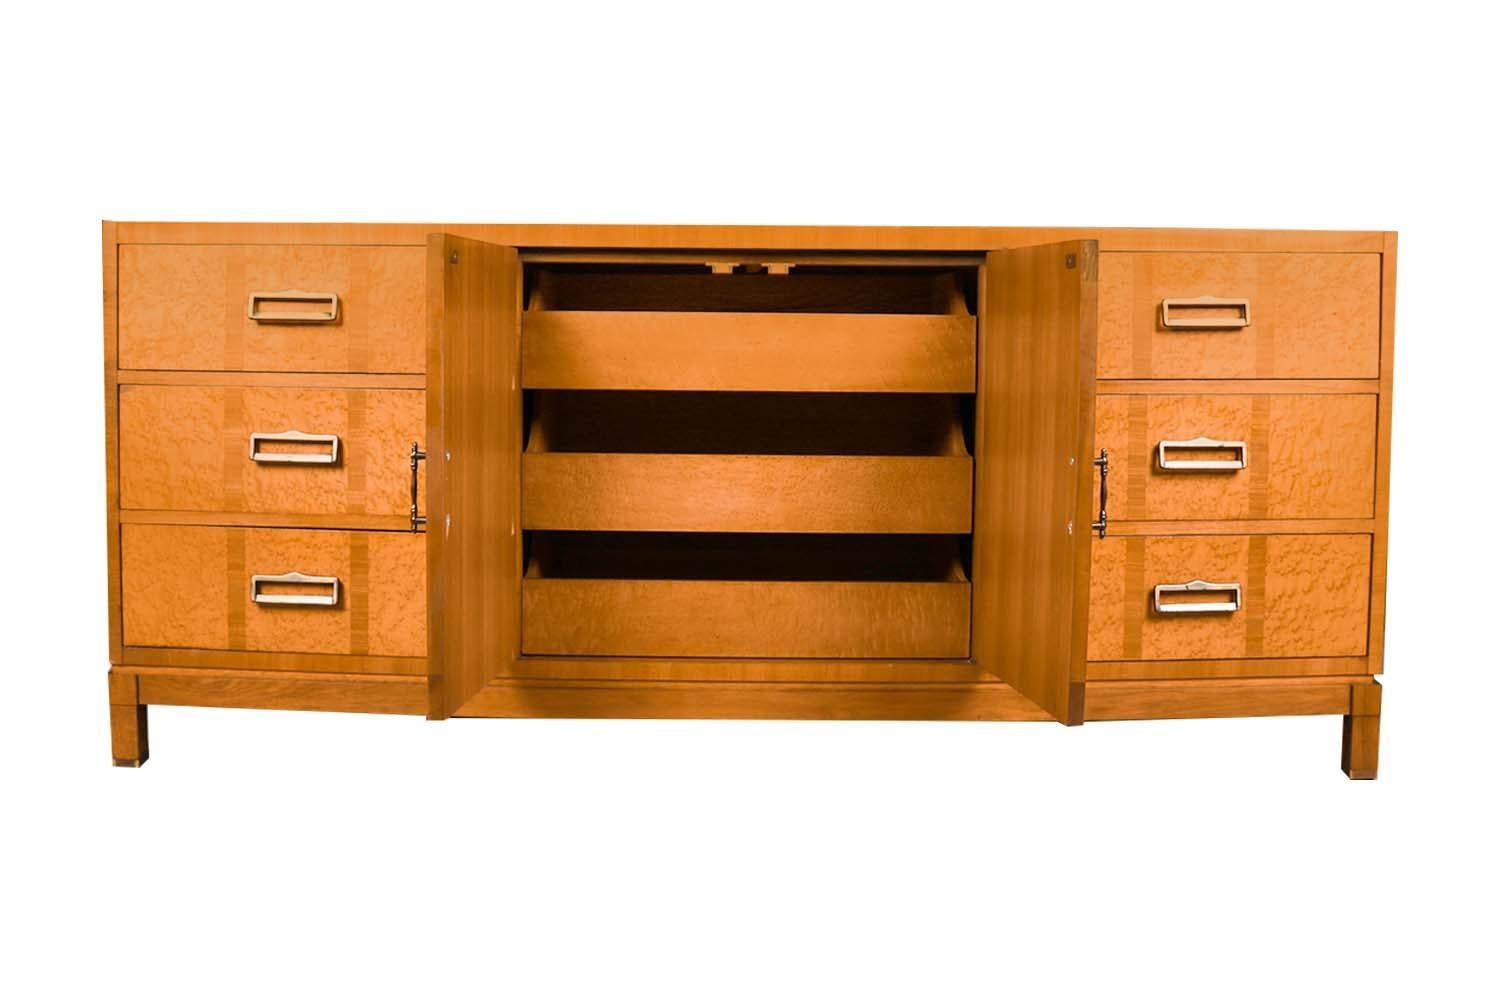 Extraordinary Mid-Century Modern “Diamond front” credenza dresser circa 1960's. This beauty features a unique geometric diamond frieze pattern on the rectangle top and center cabinet doors, in warm natural pecan tones. The double cabinet doors in